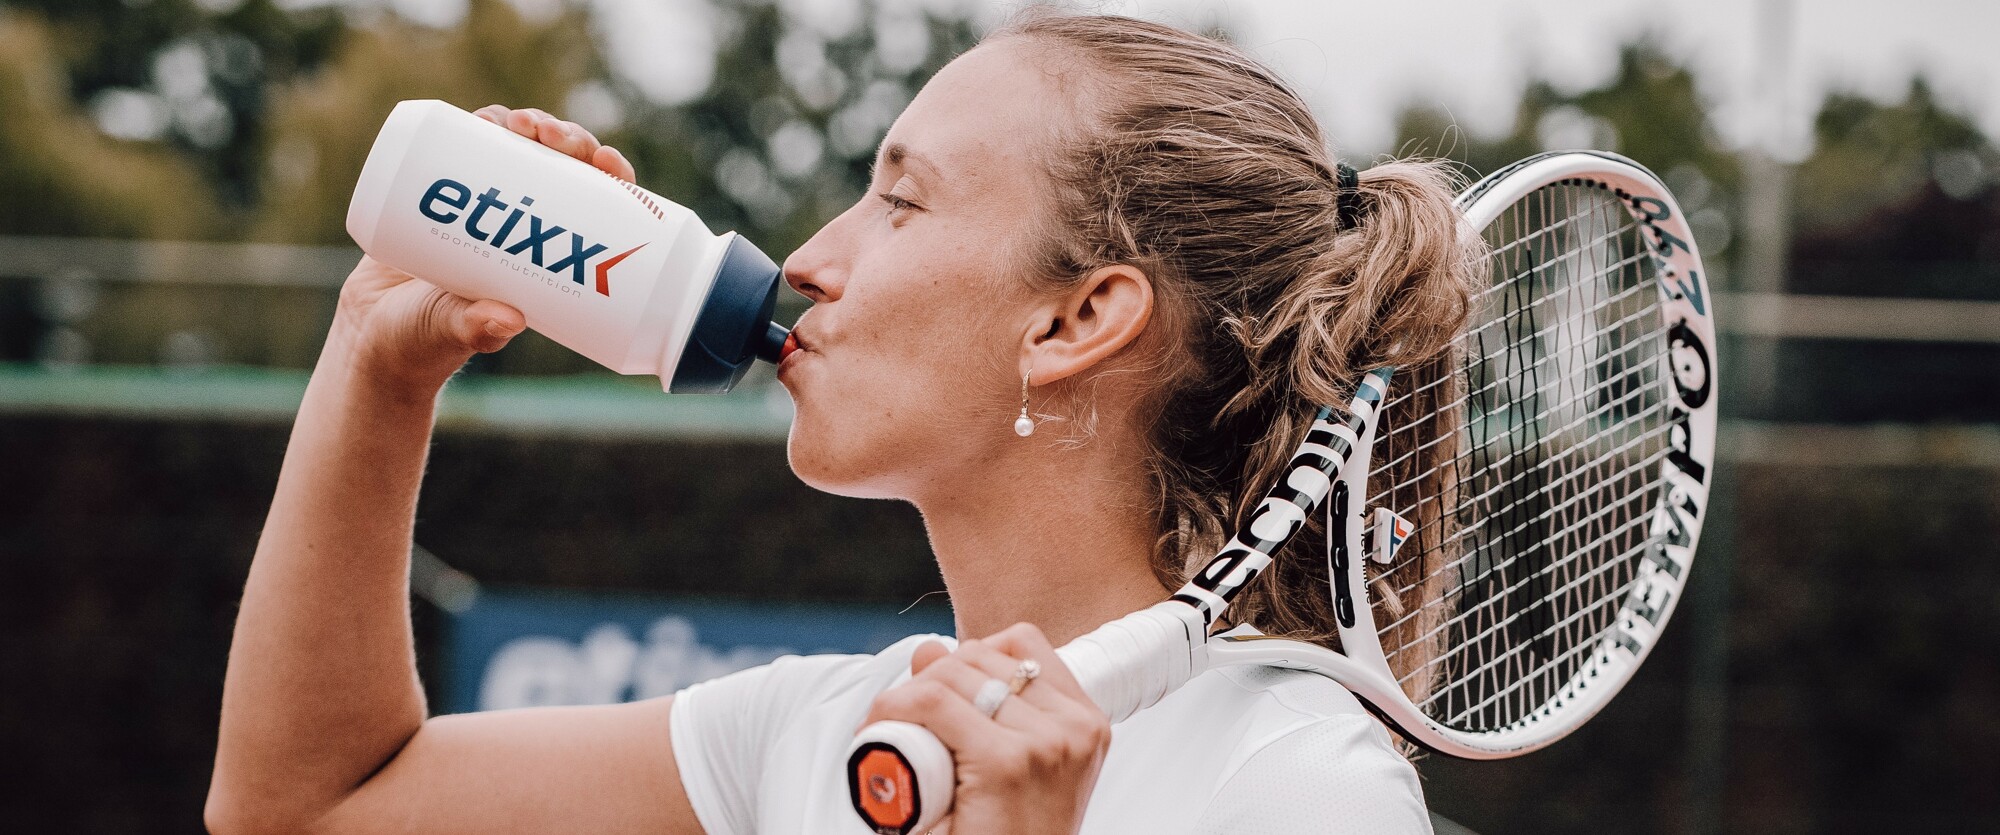 Hydration while sporting: 5 tips